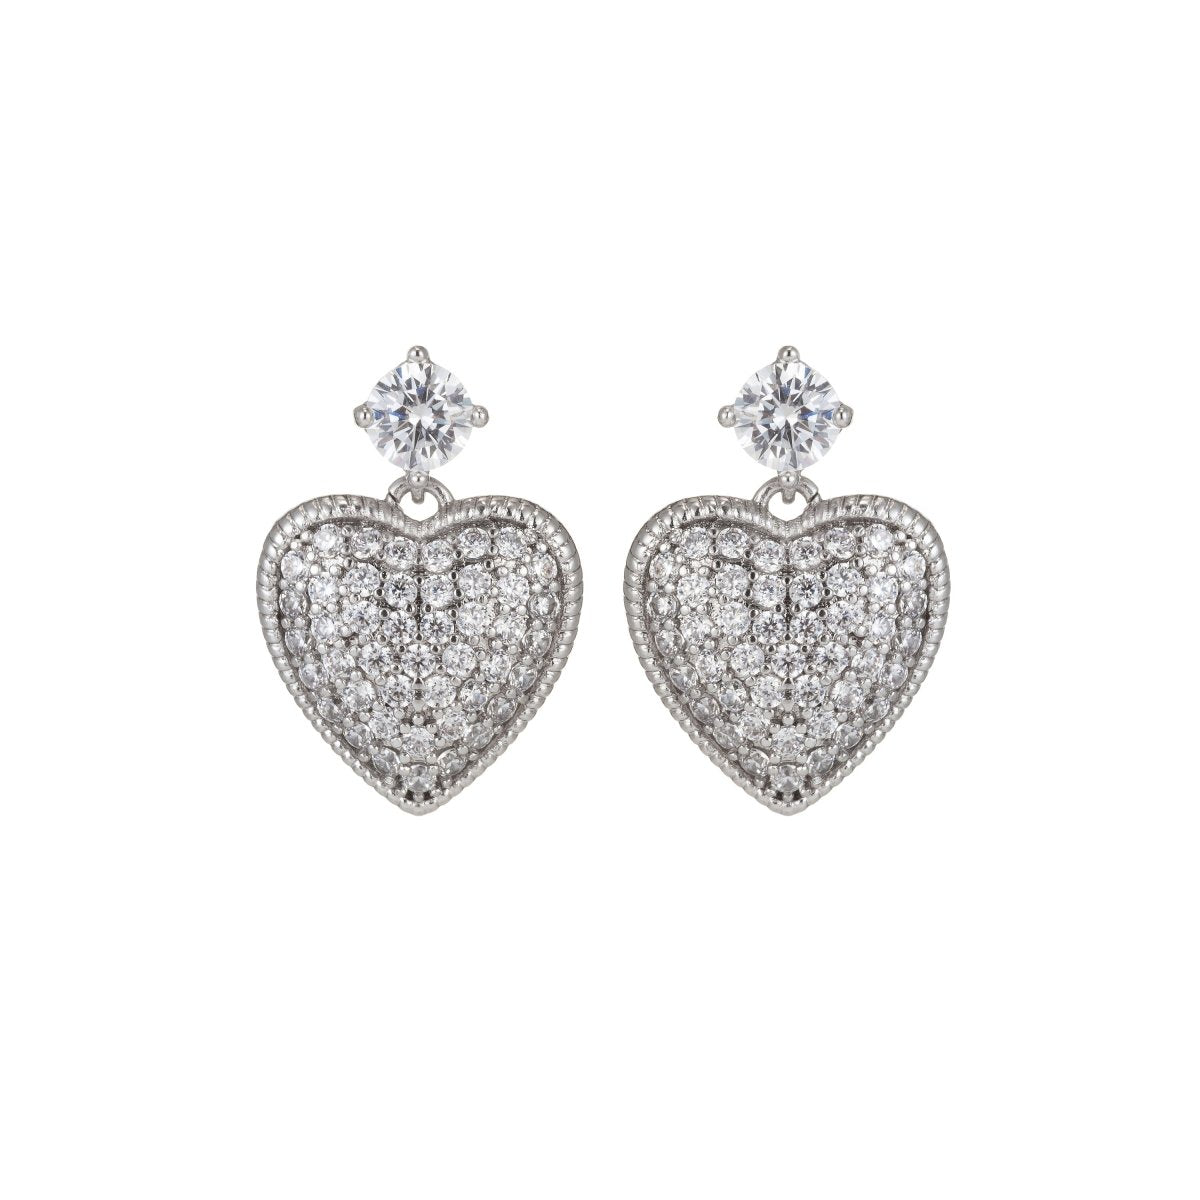 Silver Heart Stud Earrings, CZ Micro Pave Stud Earrings, Stud Earrings, Cubic Zirconia Dangle Earrings for Gift Q-023 - DLUXCA